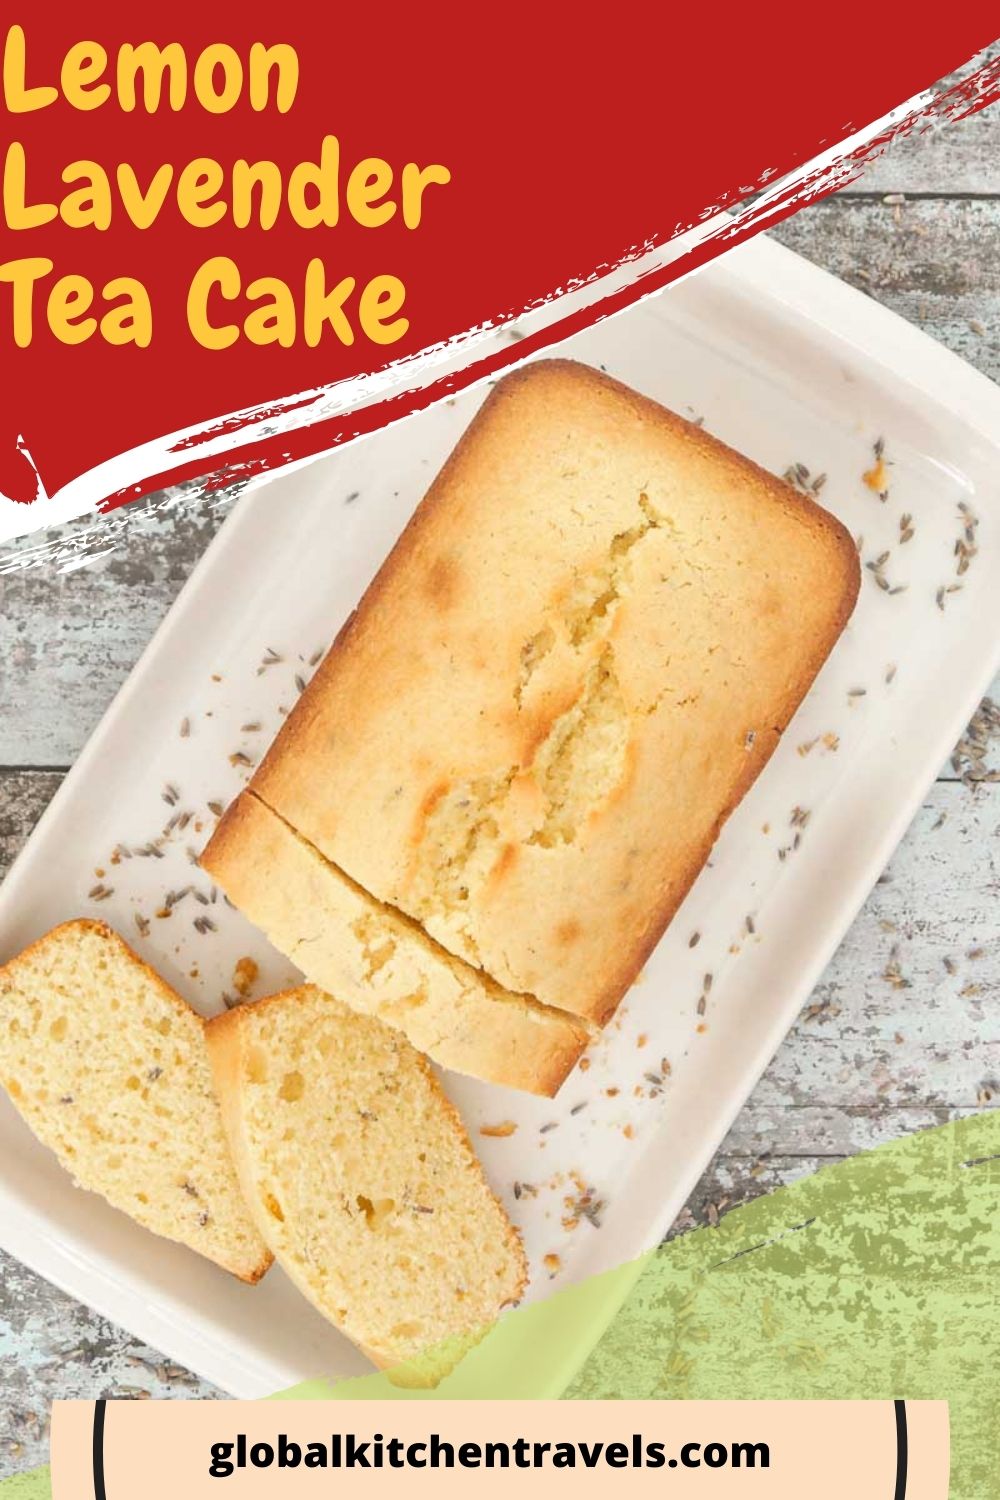 slices of lemon cake with text